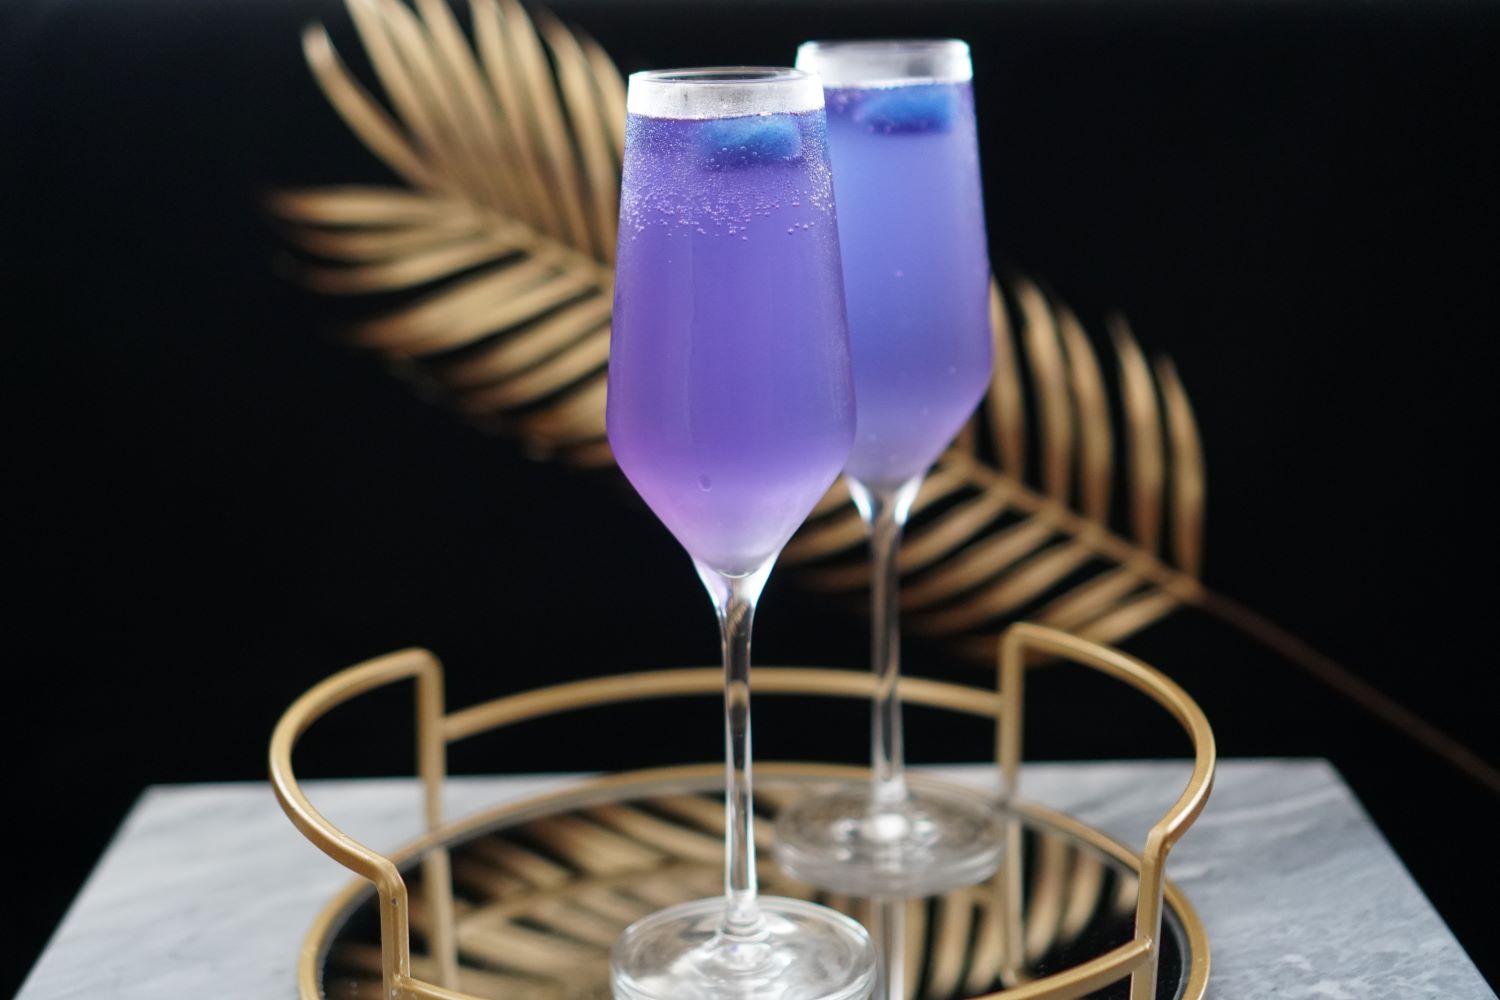 butterfly pea water kefir for dry january